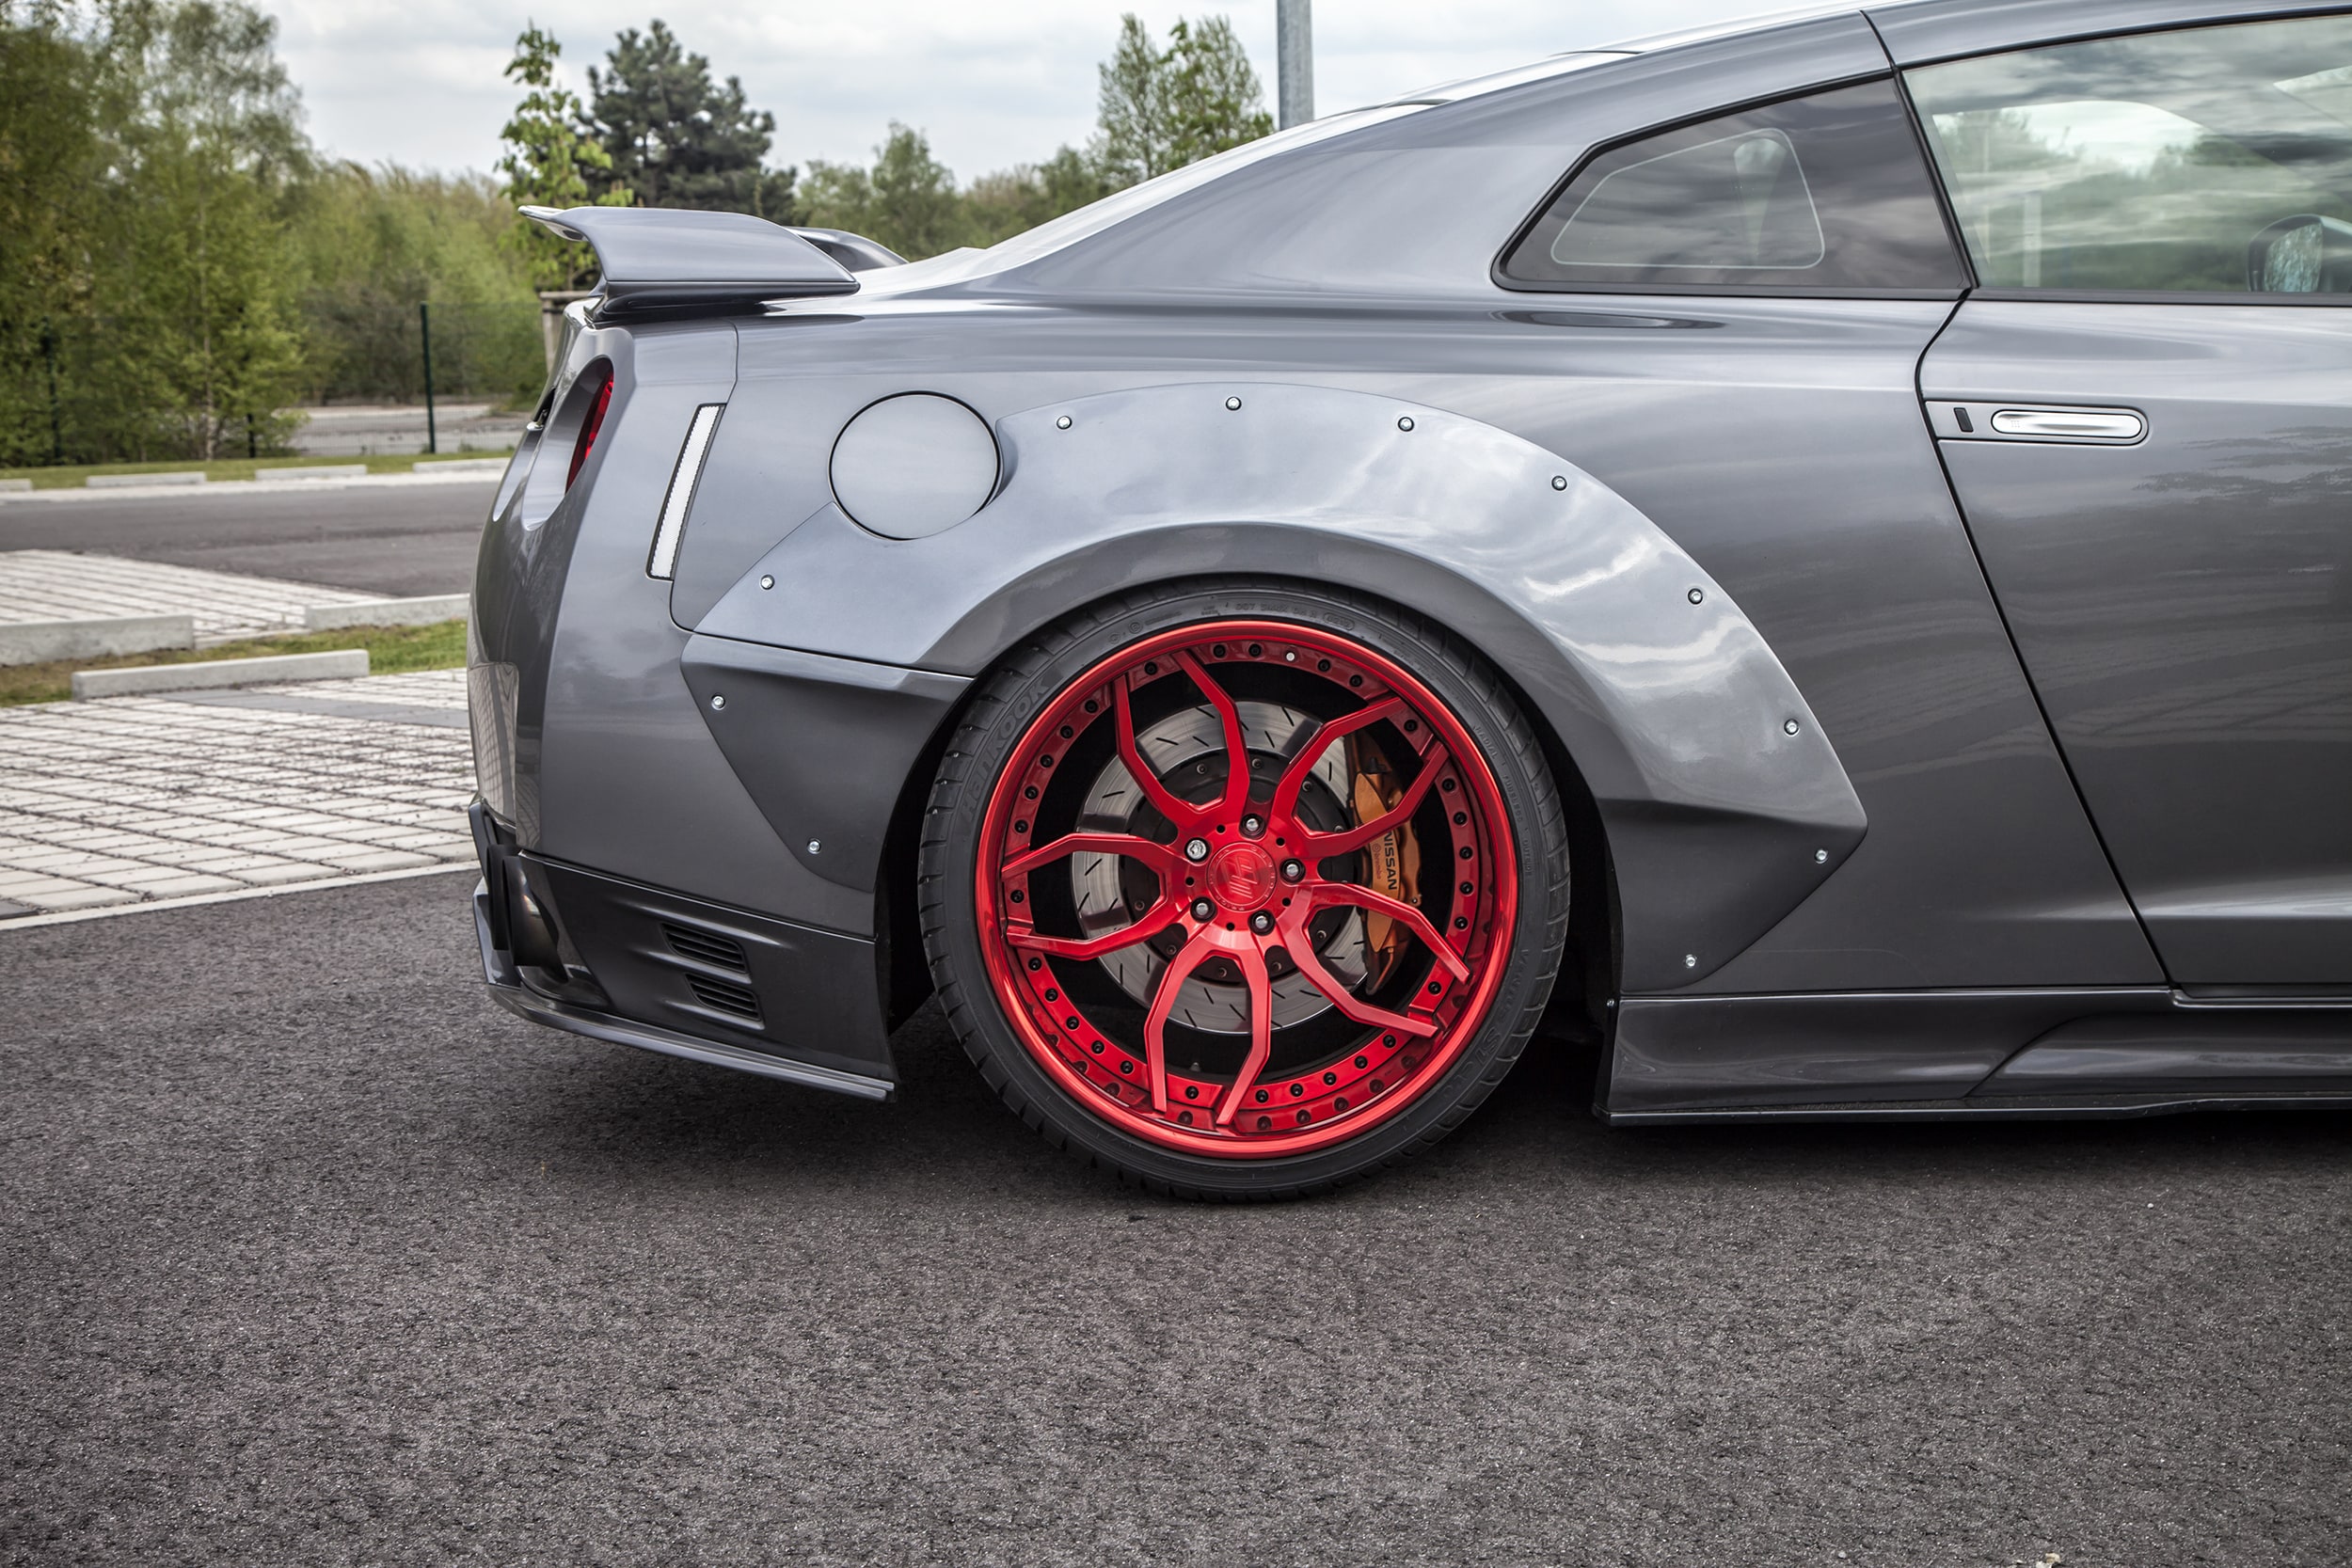 PD750 Widebody Rear Widenings for Nissan GT-R [R35]